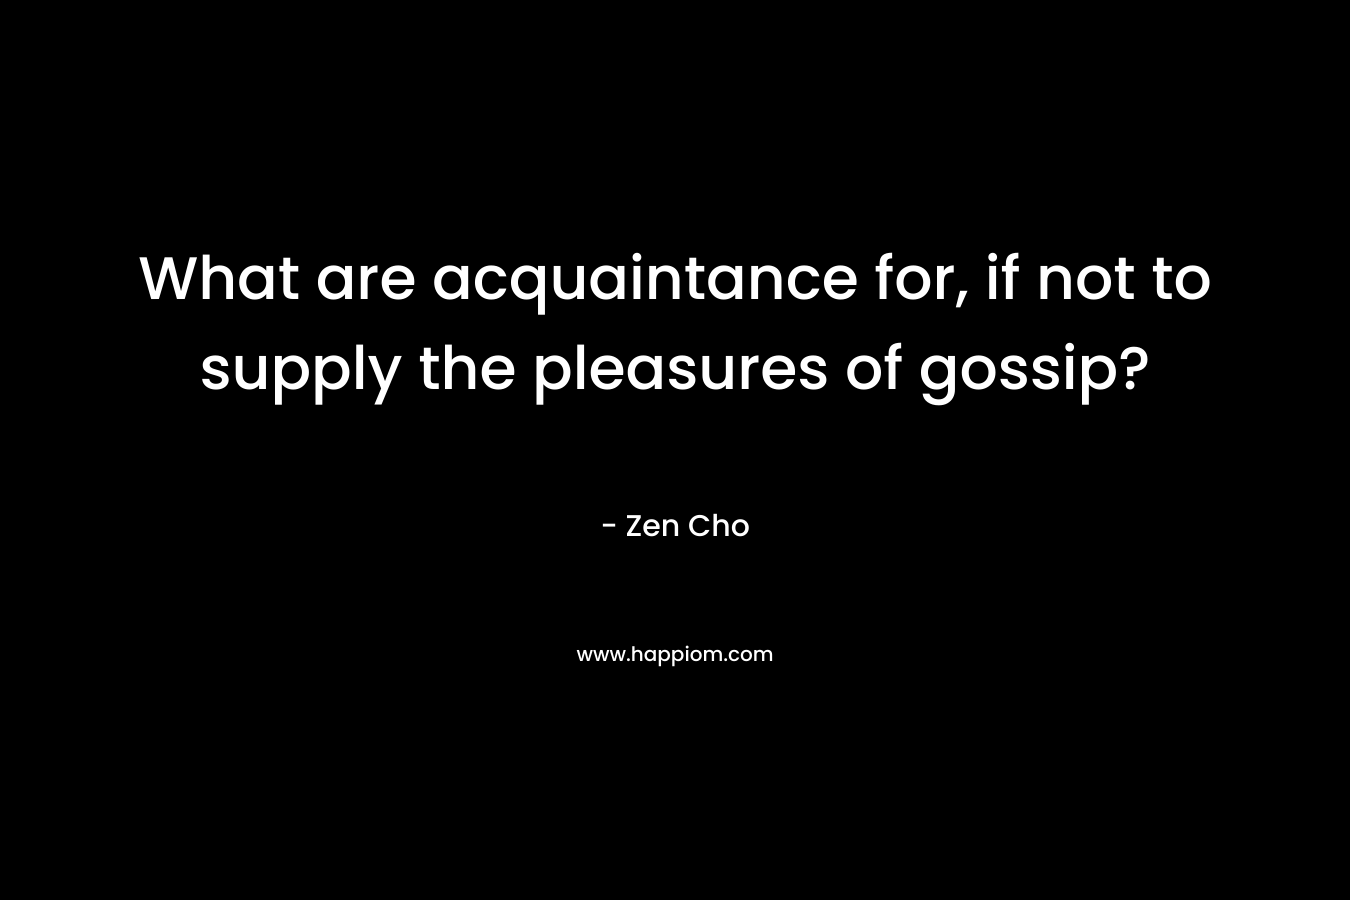 What are acquaintance for, if not to supply the pleasures of gossip? – Zen Cho